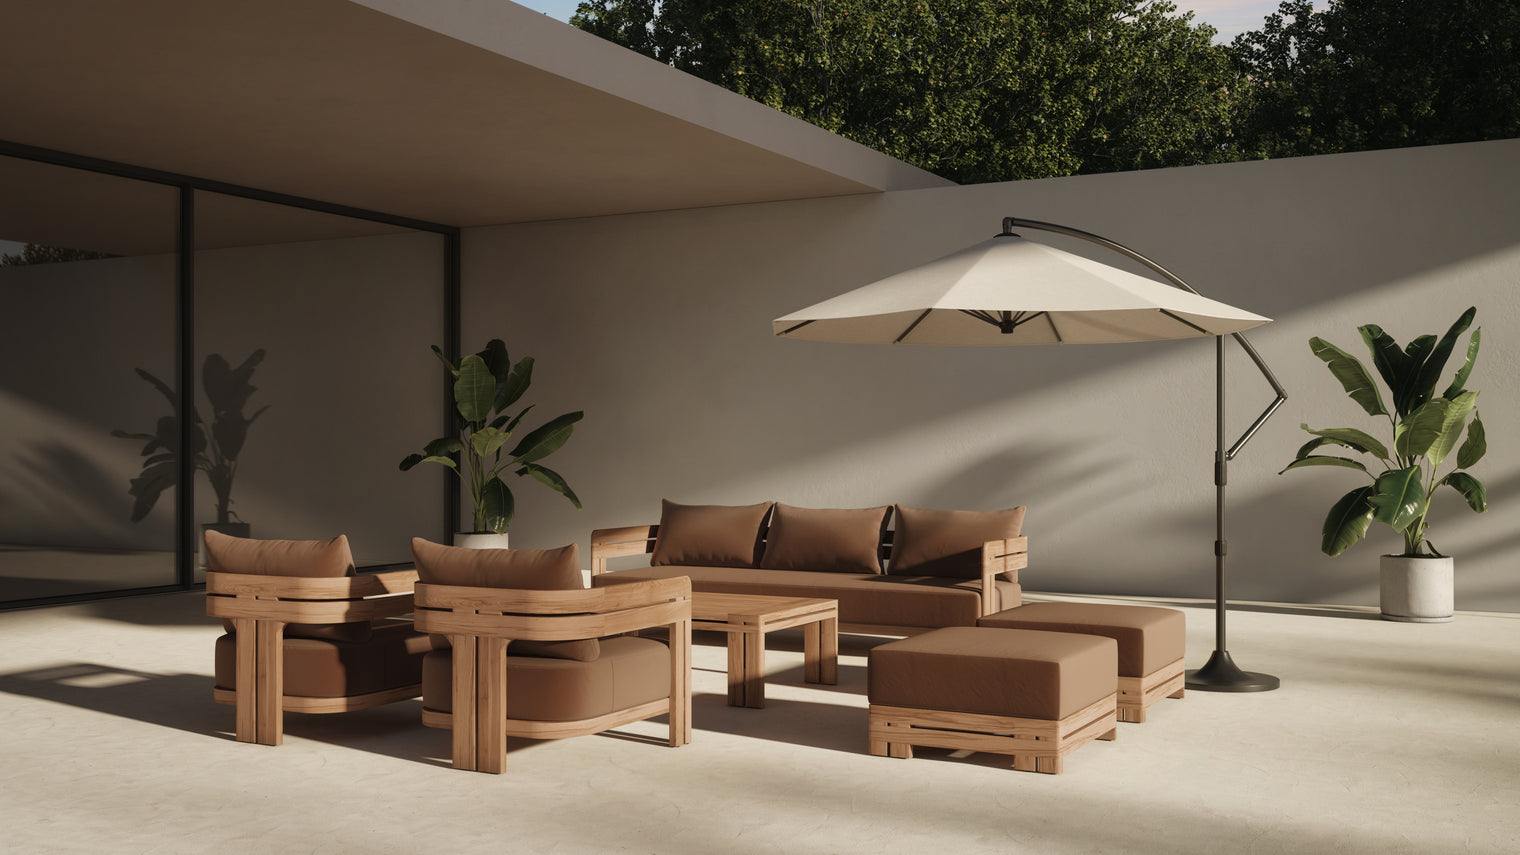 A stunning take on Teak | Crafted from premium teak wood renowned for its resilience, the Lusso Outdoor Collection is built to withstand the elements while retaining its beauty for years to come. The warm, honey-toned hue of the teak wood adds a touch of warmth and sophistication to any outdoor setting, creating an inviting atmosphere for gatherings with loved ones.
